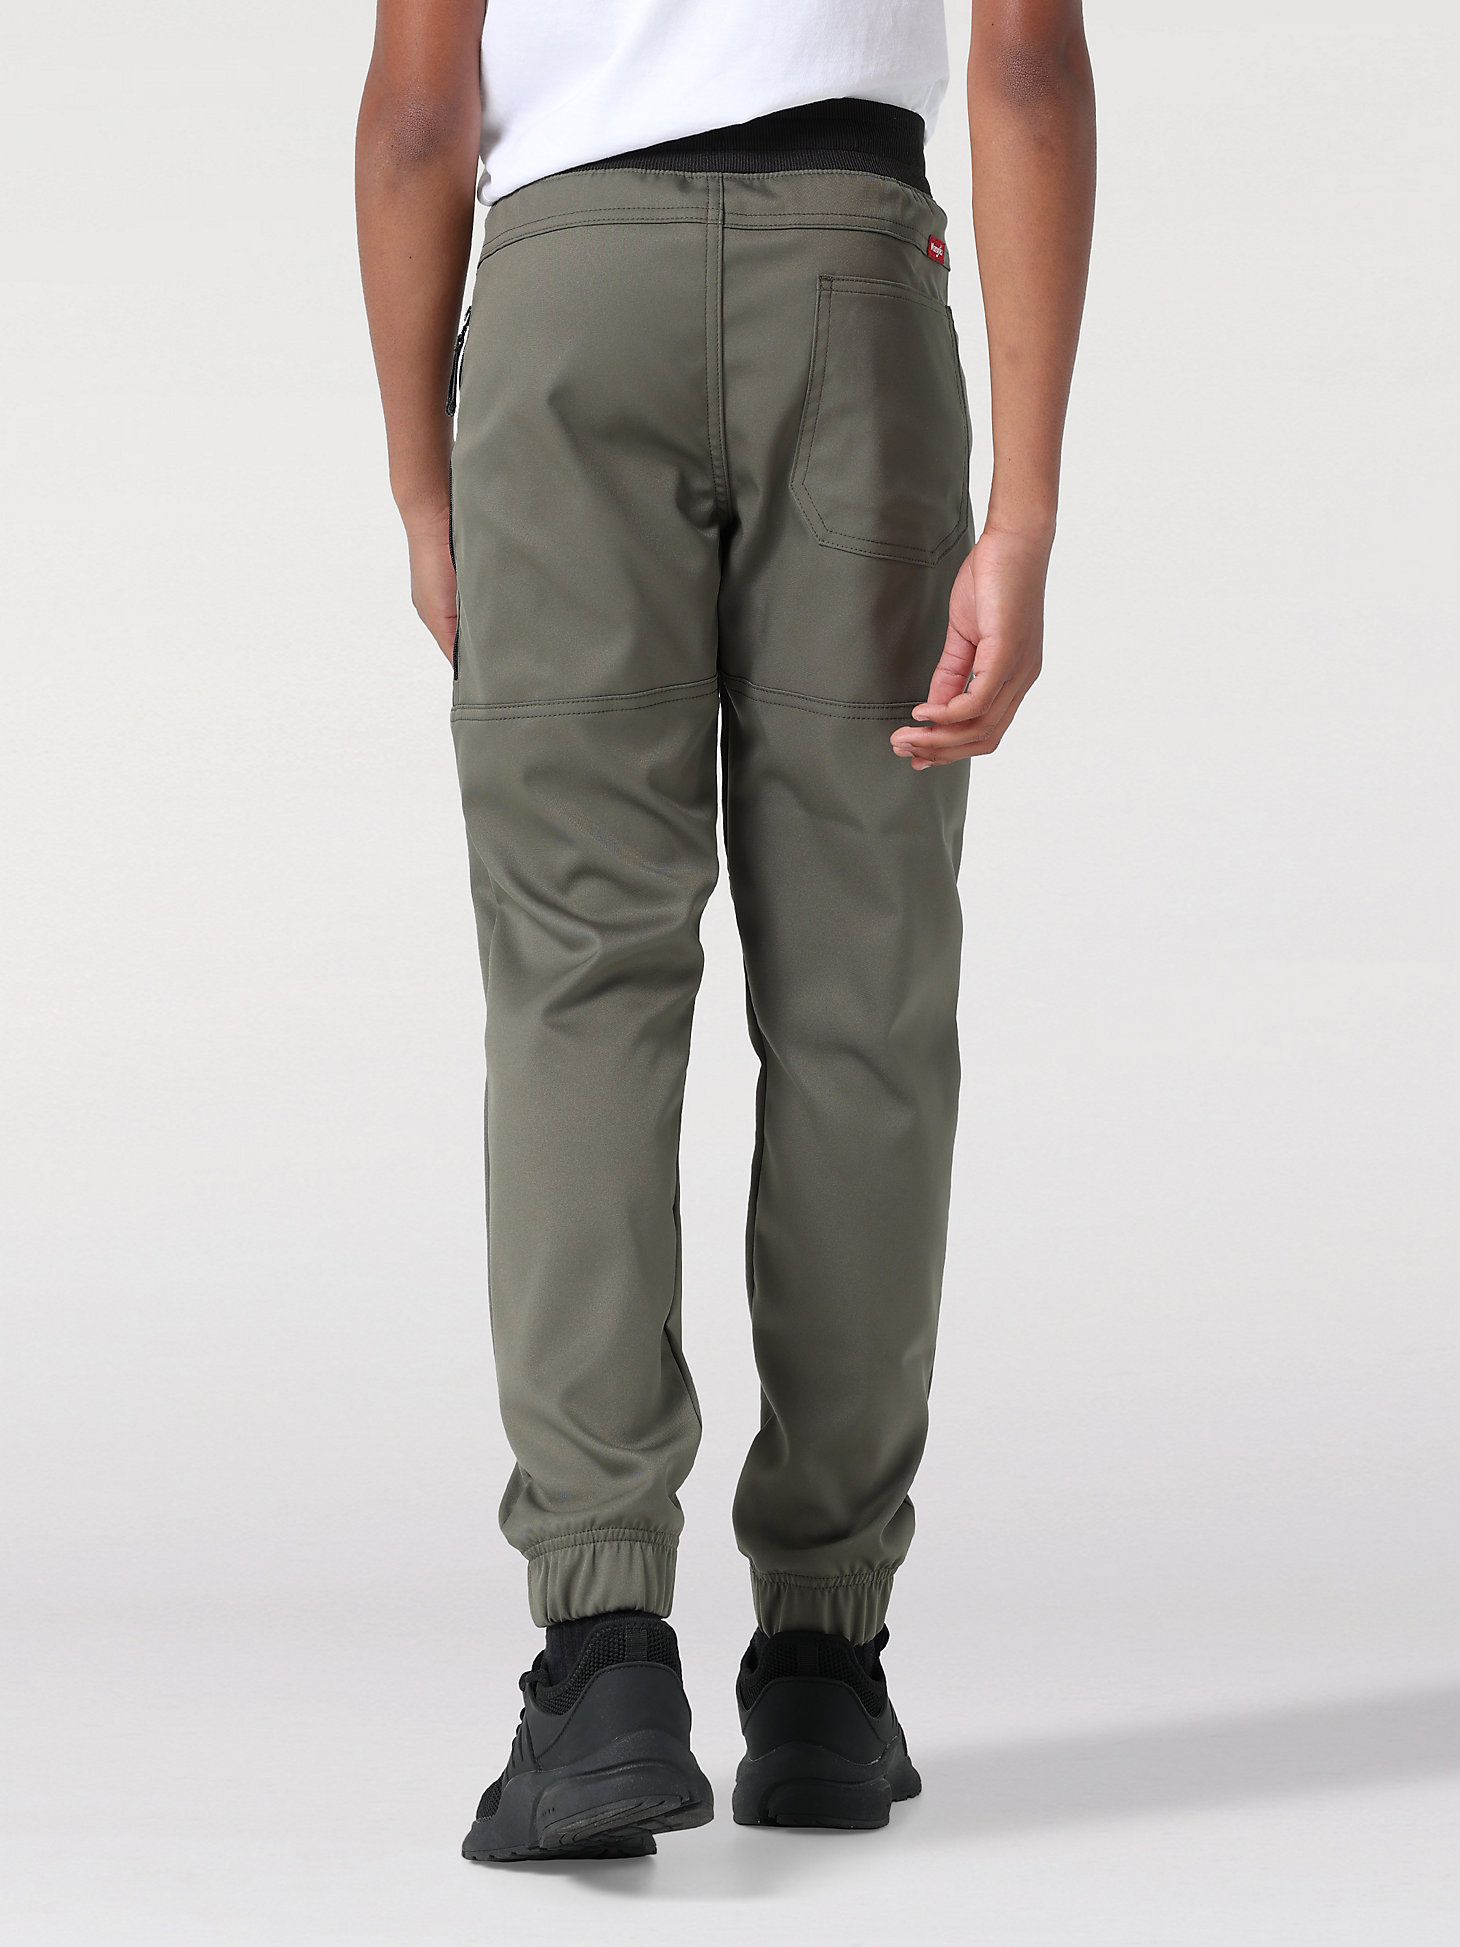 Boy's Connect Cargo Wireless Pant (Husky) in Olive alternative view 1